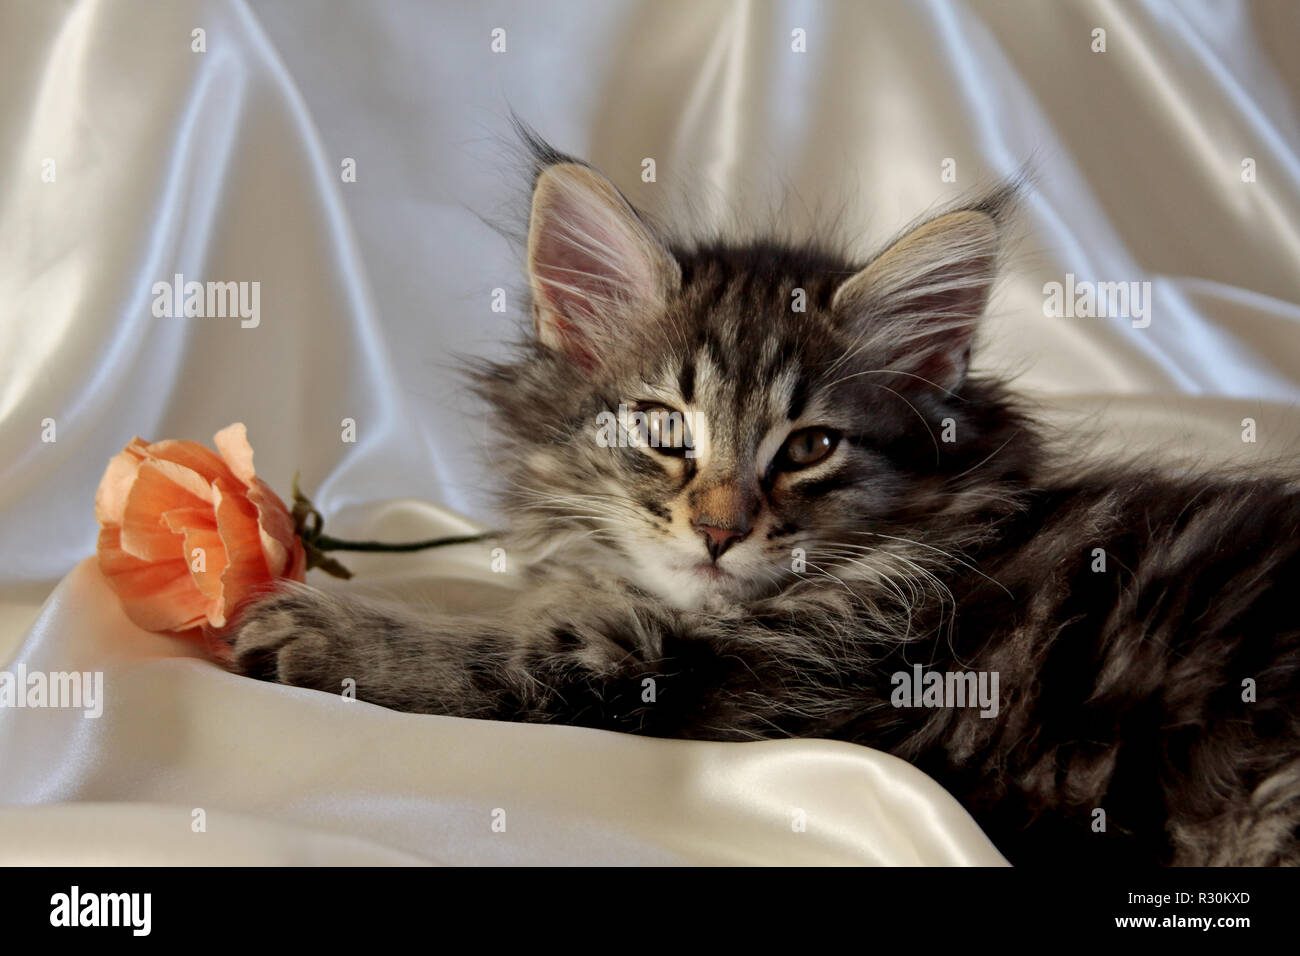 Small Norwegian forest cat male on white luxury sateen cloth with orange paper rose Stock Photo